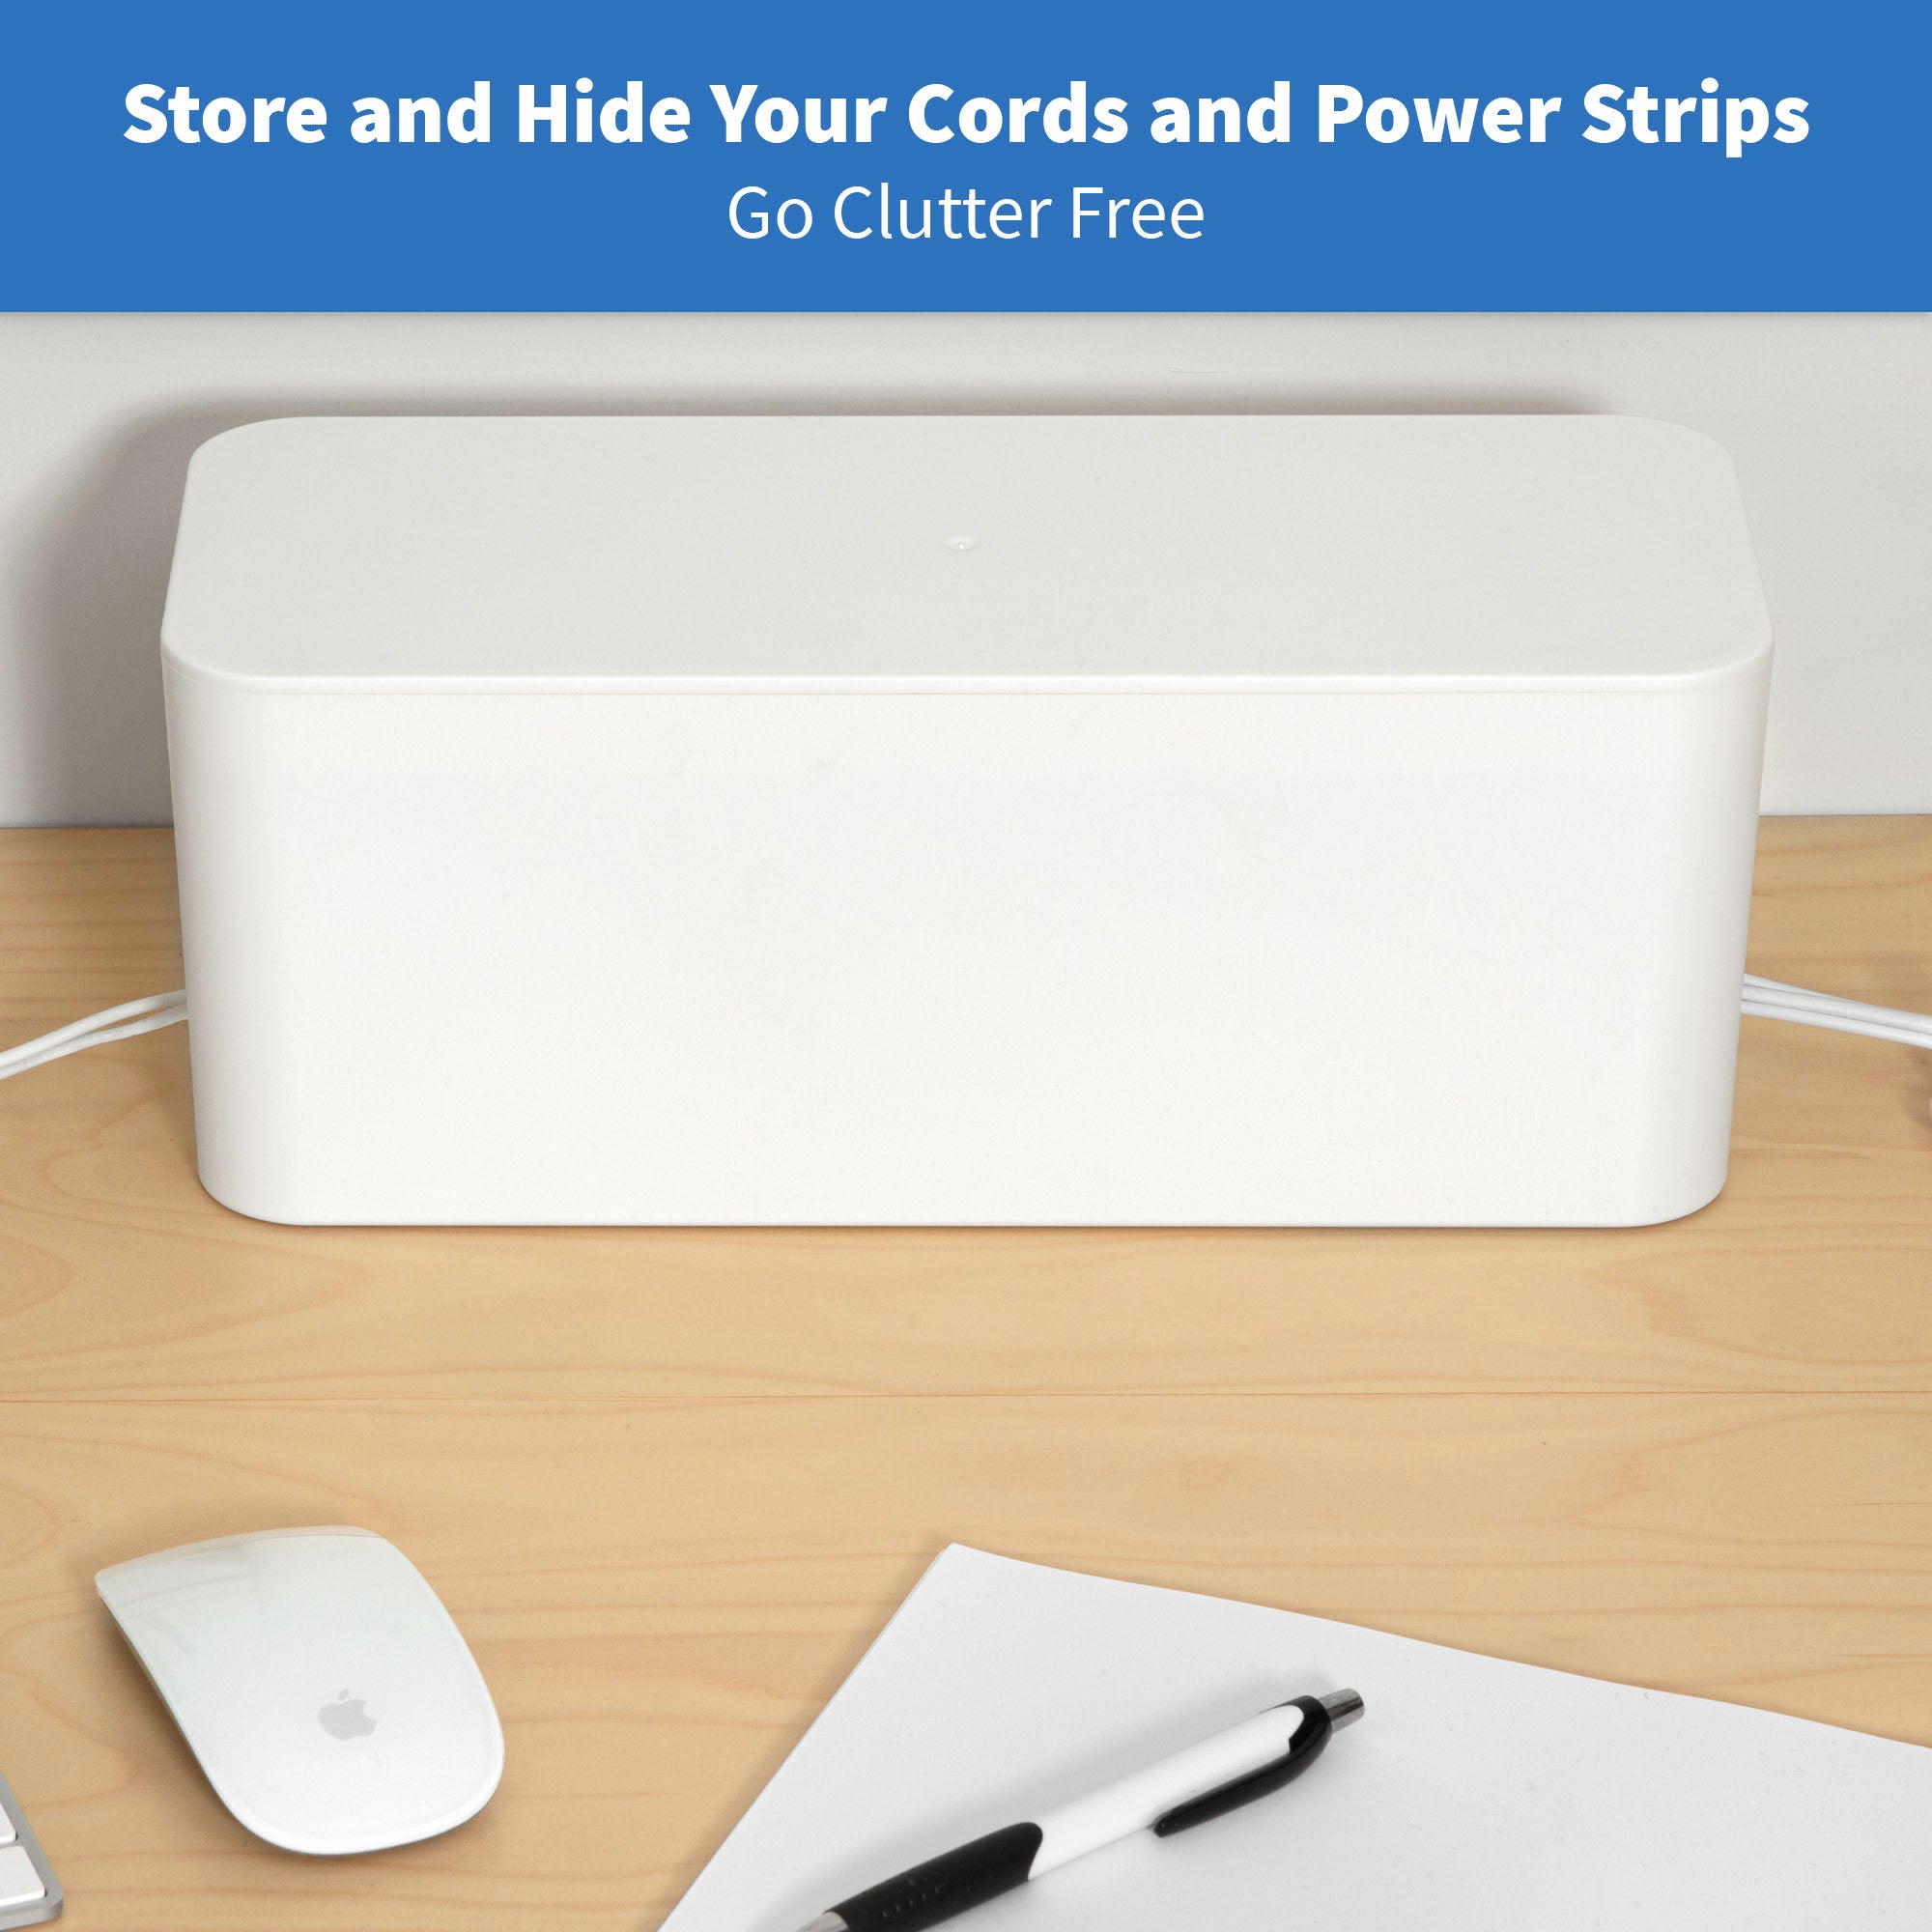 Cable Management Box - Cord Organizer Box to Hide Power Strips Cord Hider  Box to Hide Protector Cover Under Desk to Conceal The Electrical Wires from  TV Computer Under Desk and on